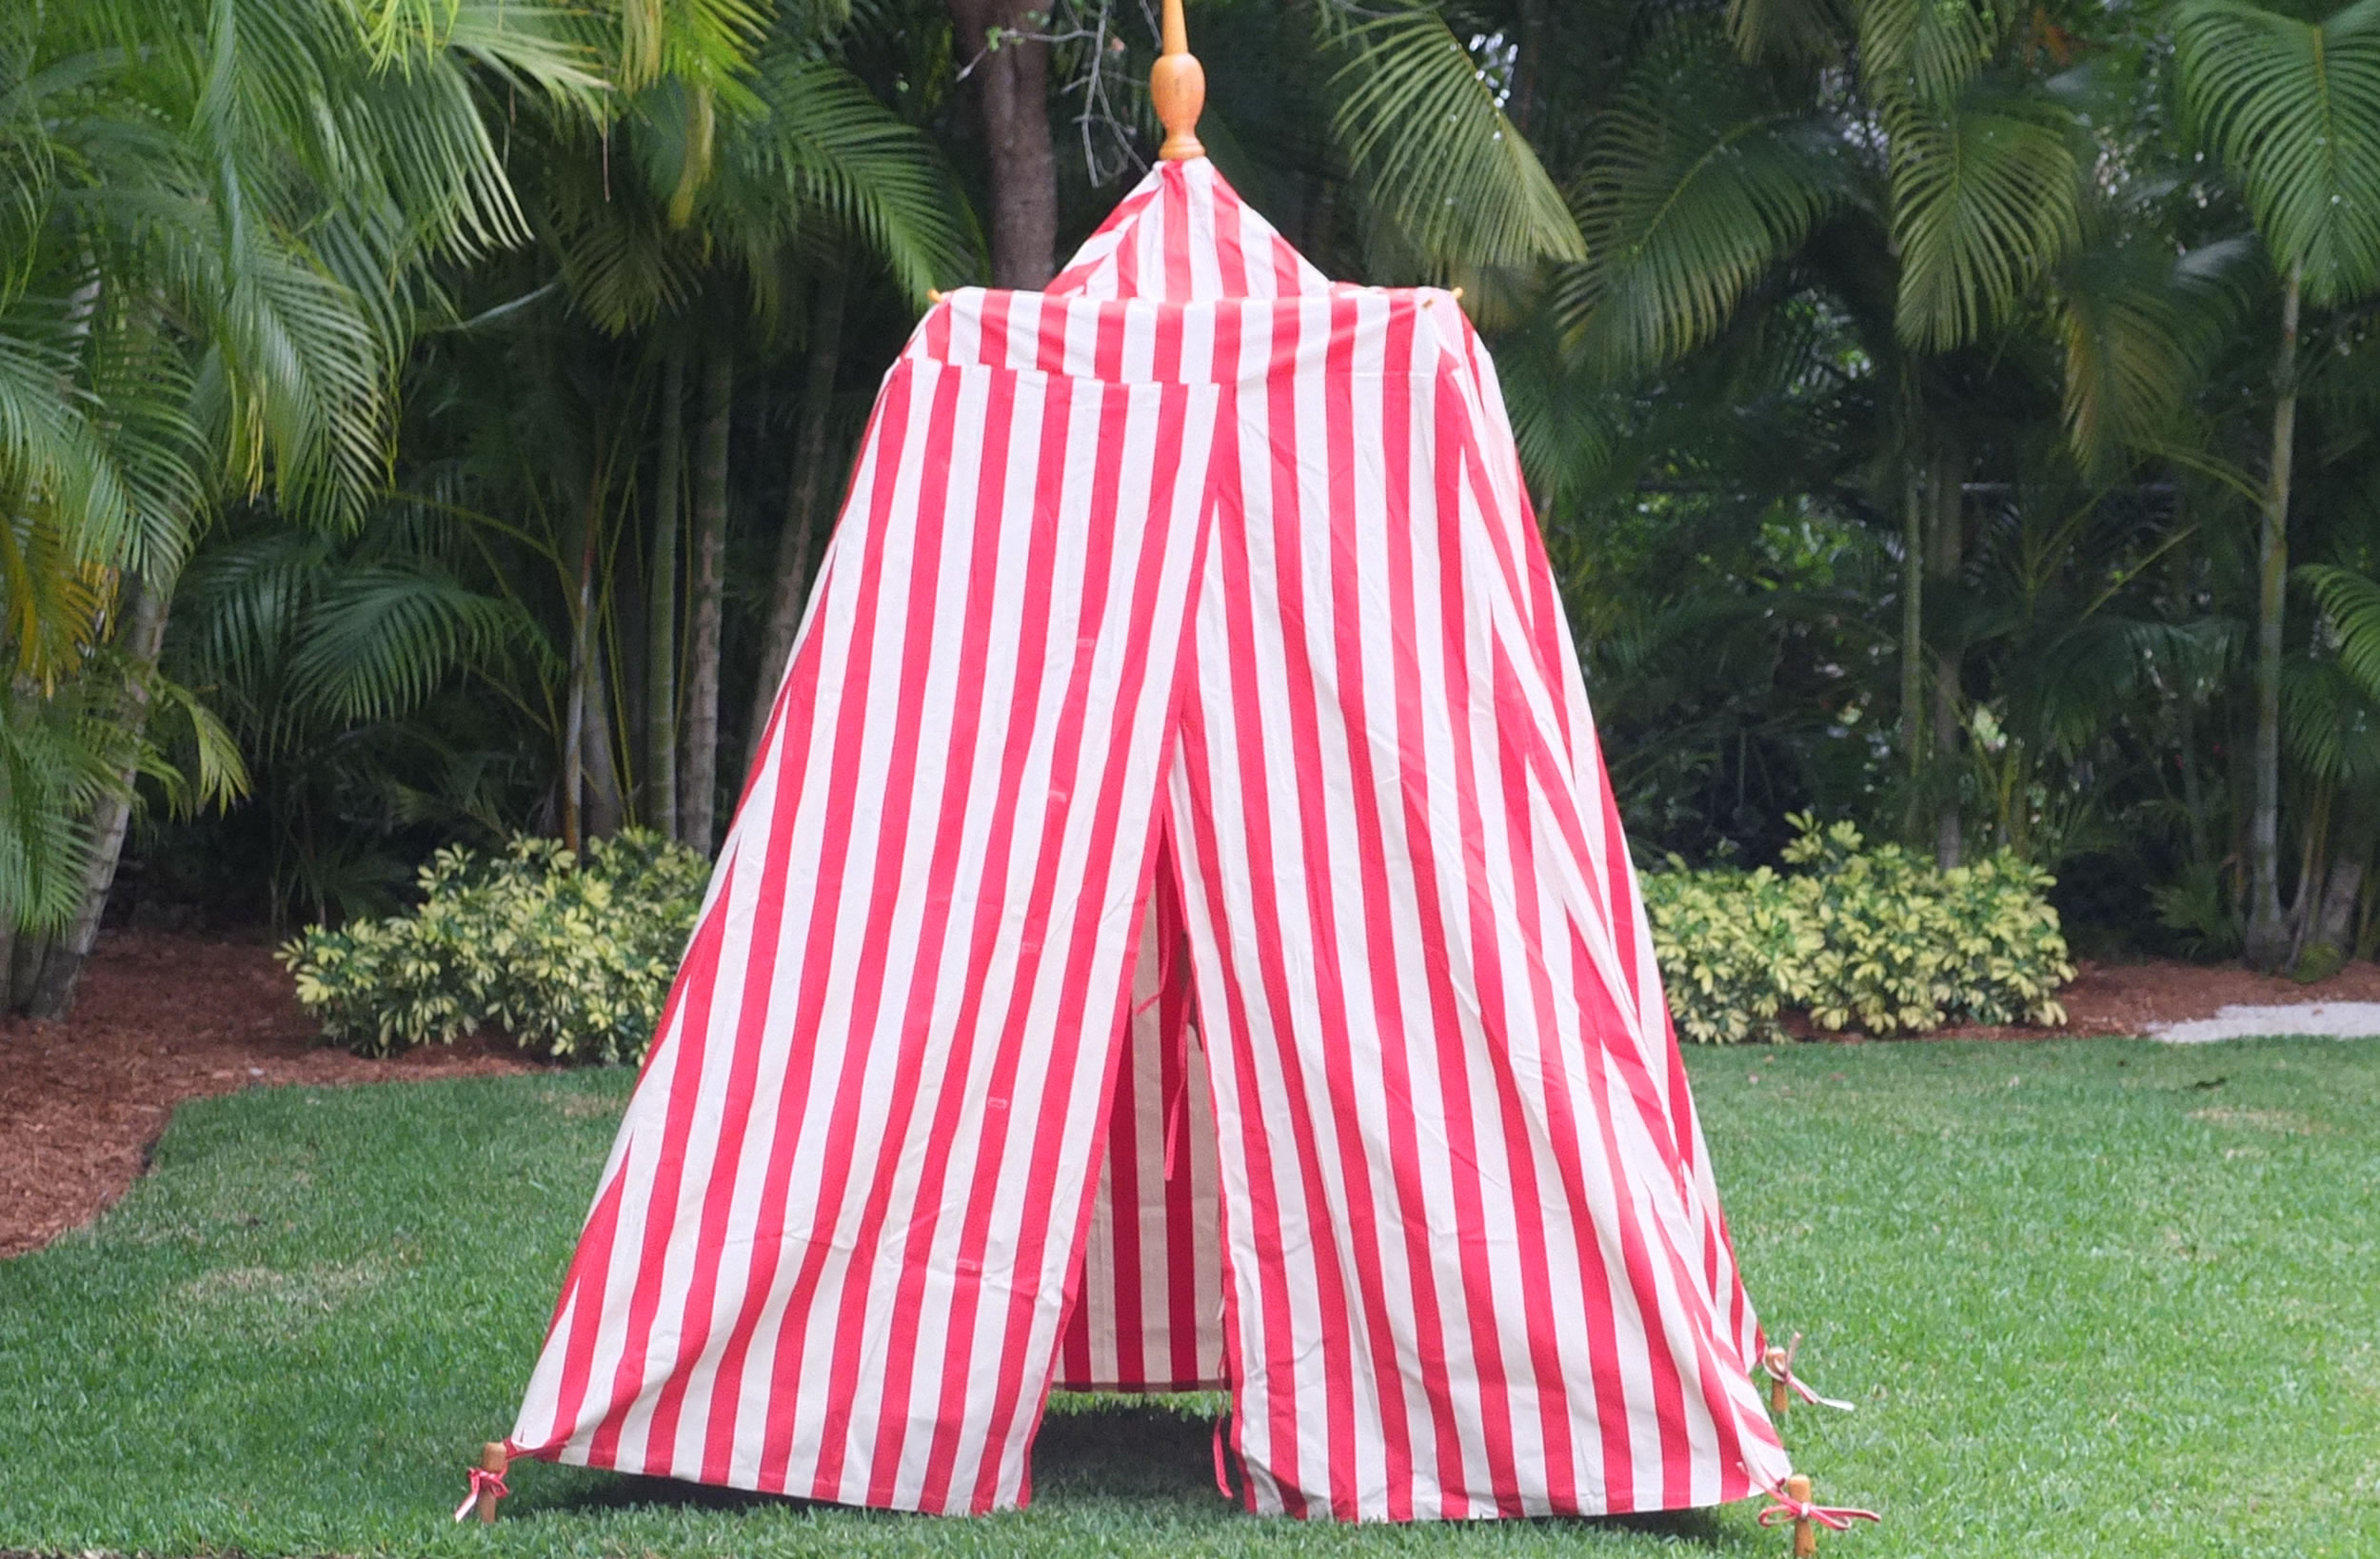 Red Striped Beach Tents | Empire Bathing Tents in Red and White Stripes